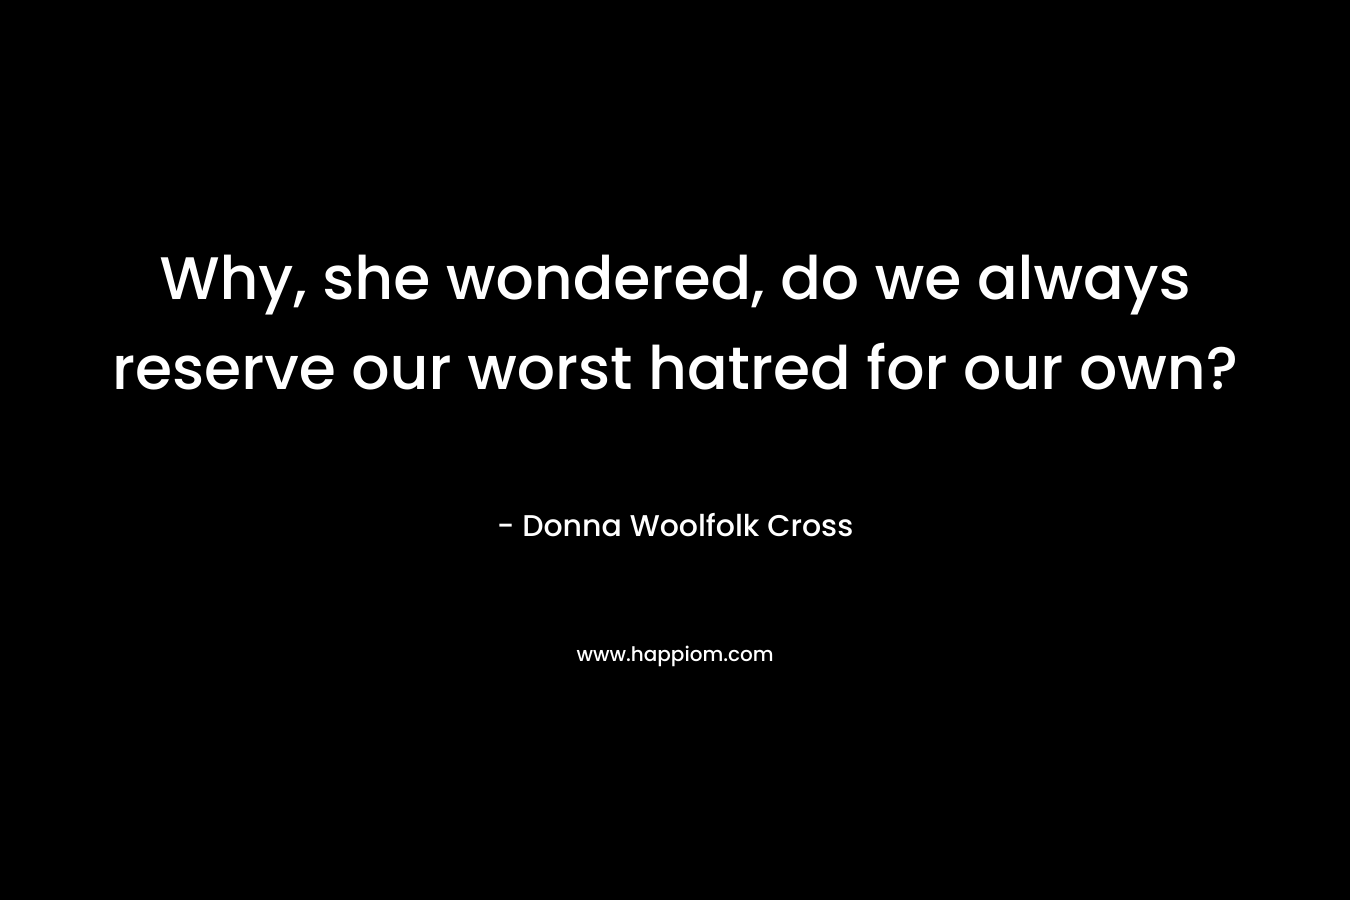 Why, she wondered, do we always reserve our worst hatred for our own? – Donna Woolfolk Cross